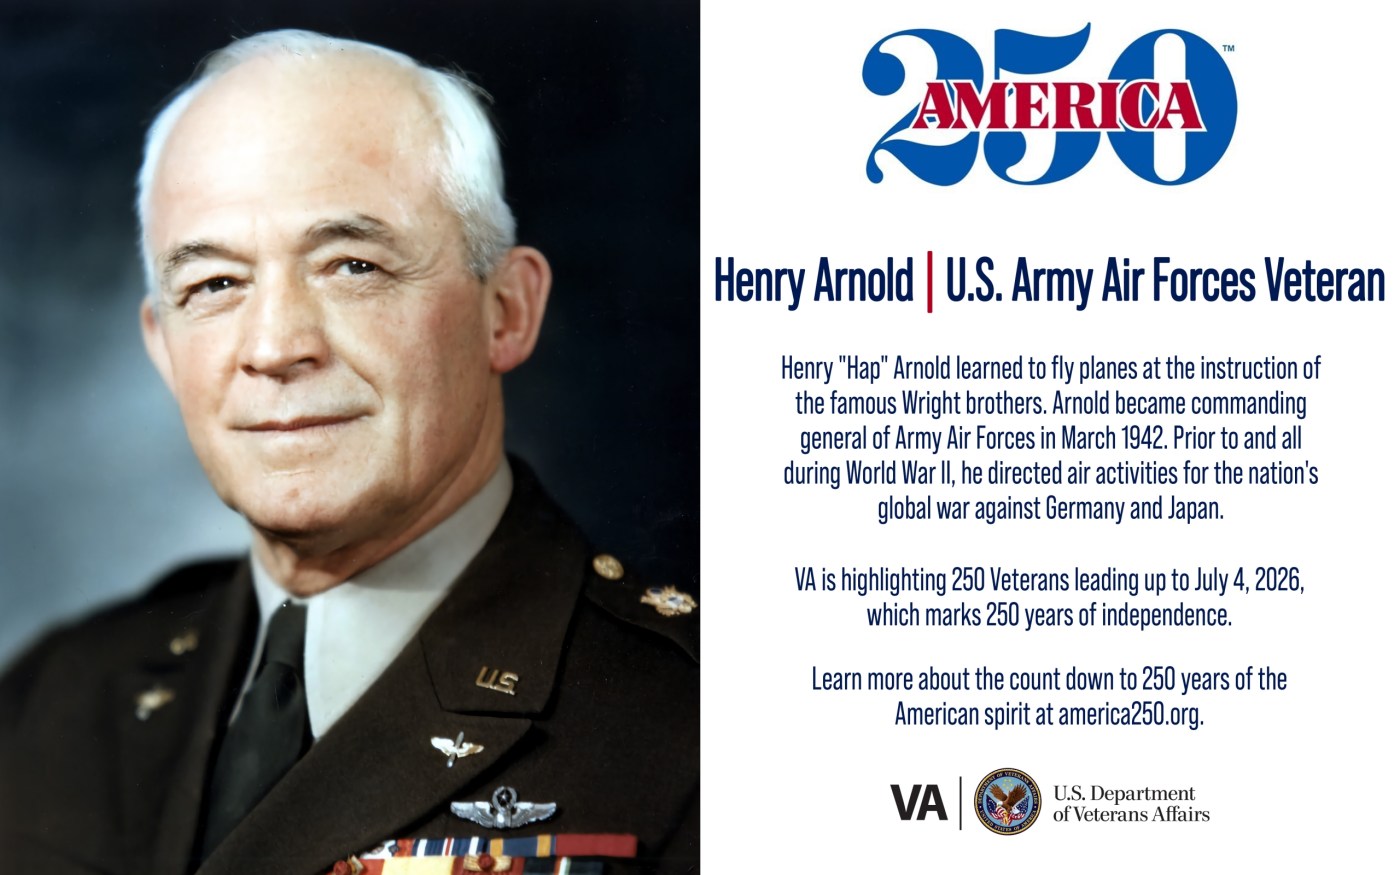 America250: Army Air Forces Veteran Henry “Hap” Arnold